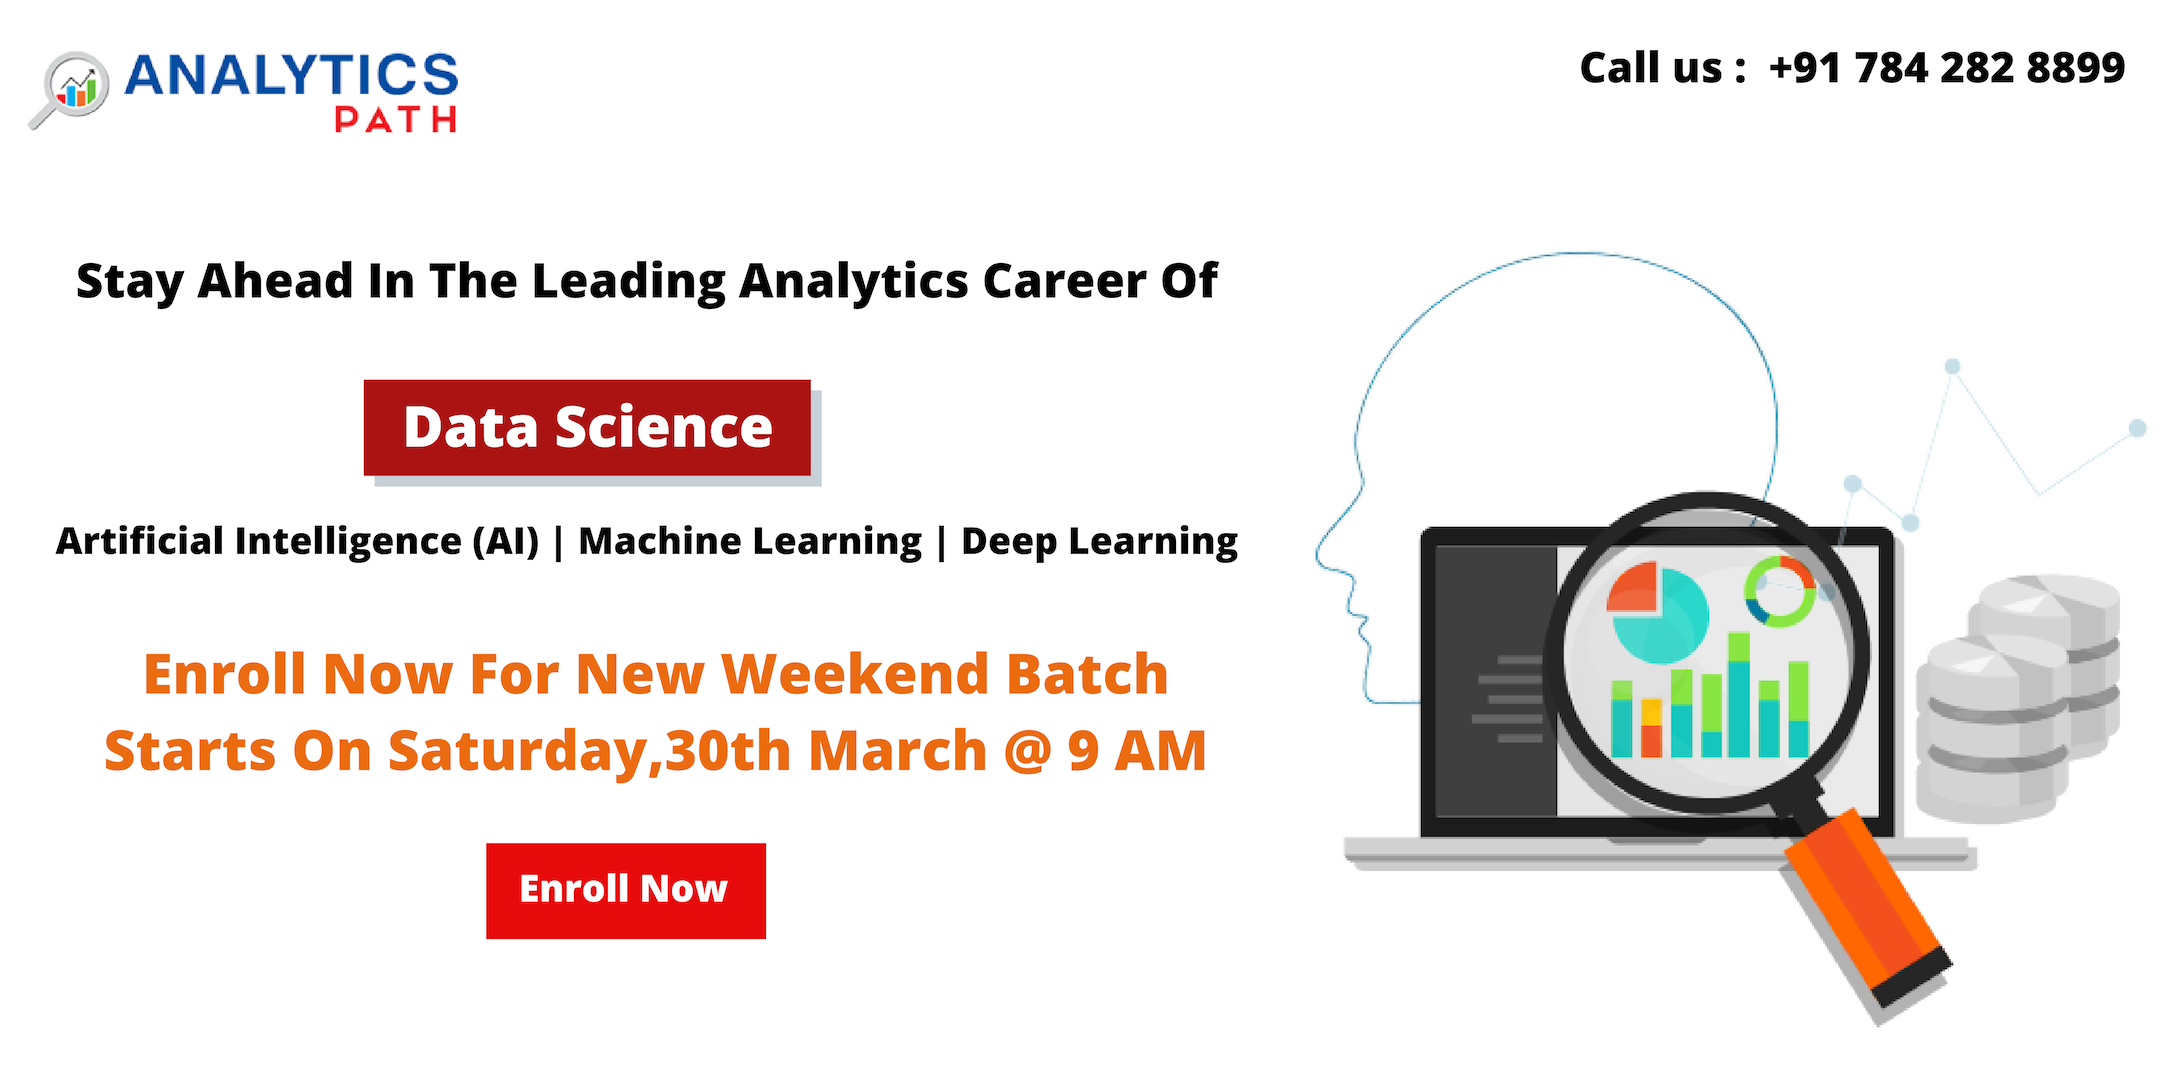 Enter Into The World Of Data Science By Attending The New Weekend Batch Session By Analytics Path Scheduled On 30th March, 9 AM In Hyderabad., Hyderabad, Telangana, India